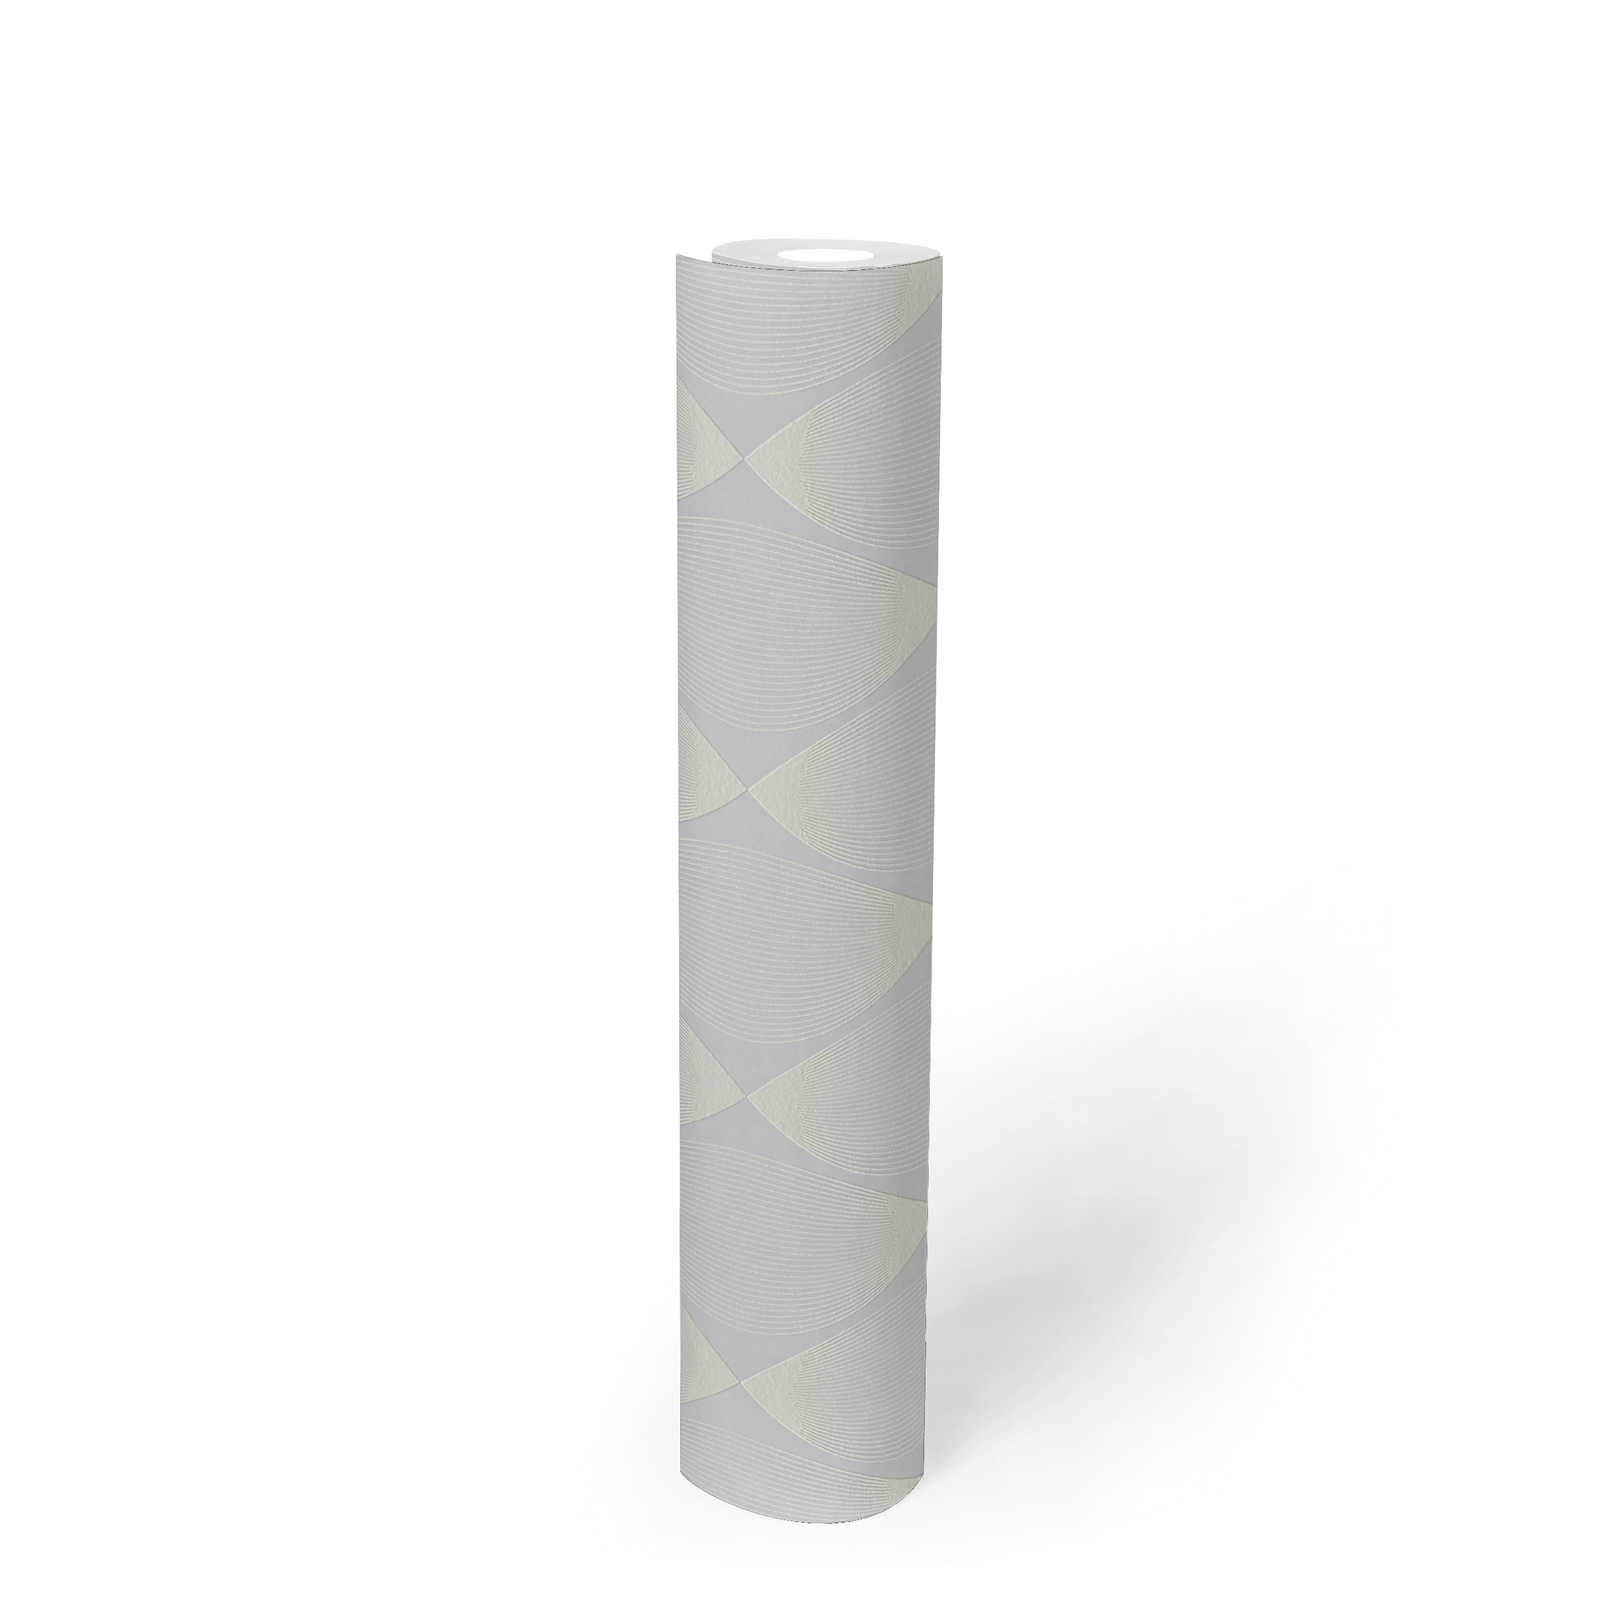             Paintable non-woven wallpaper with diamond pattern - Paintable
        